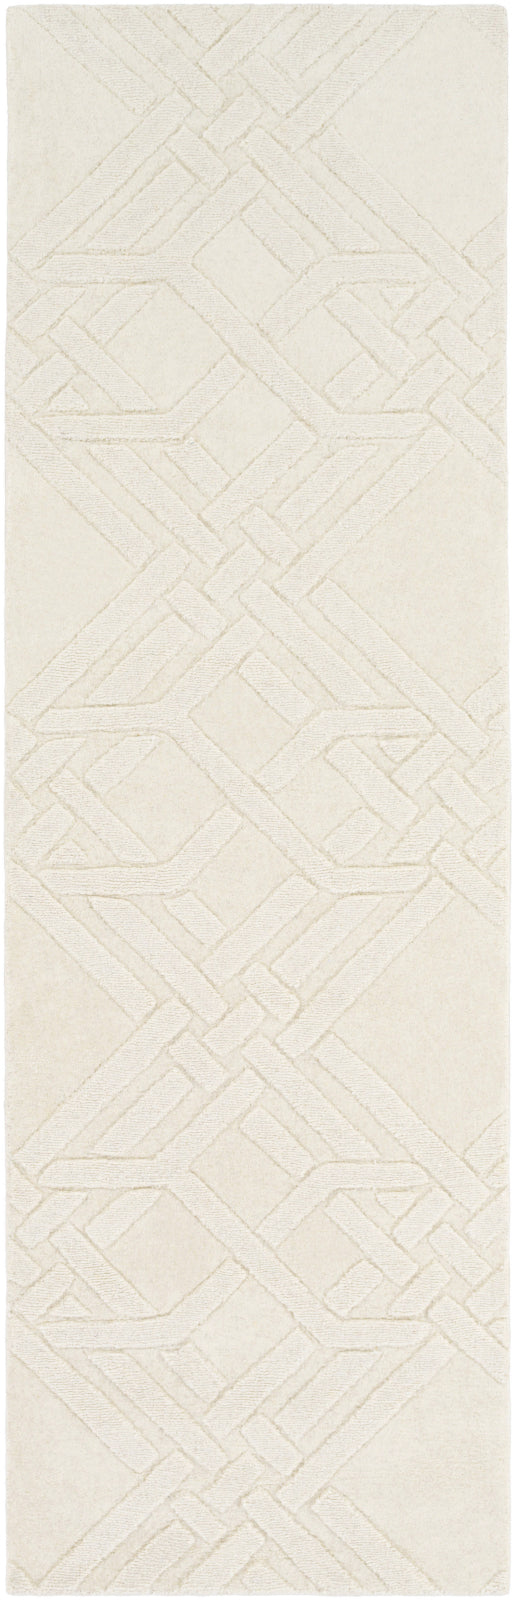 Surya The Oakes OAK-6001 Area Rug by Florence Broadhurst